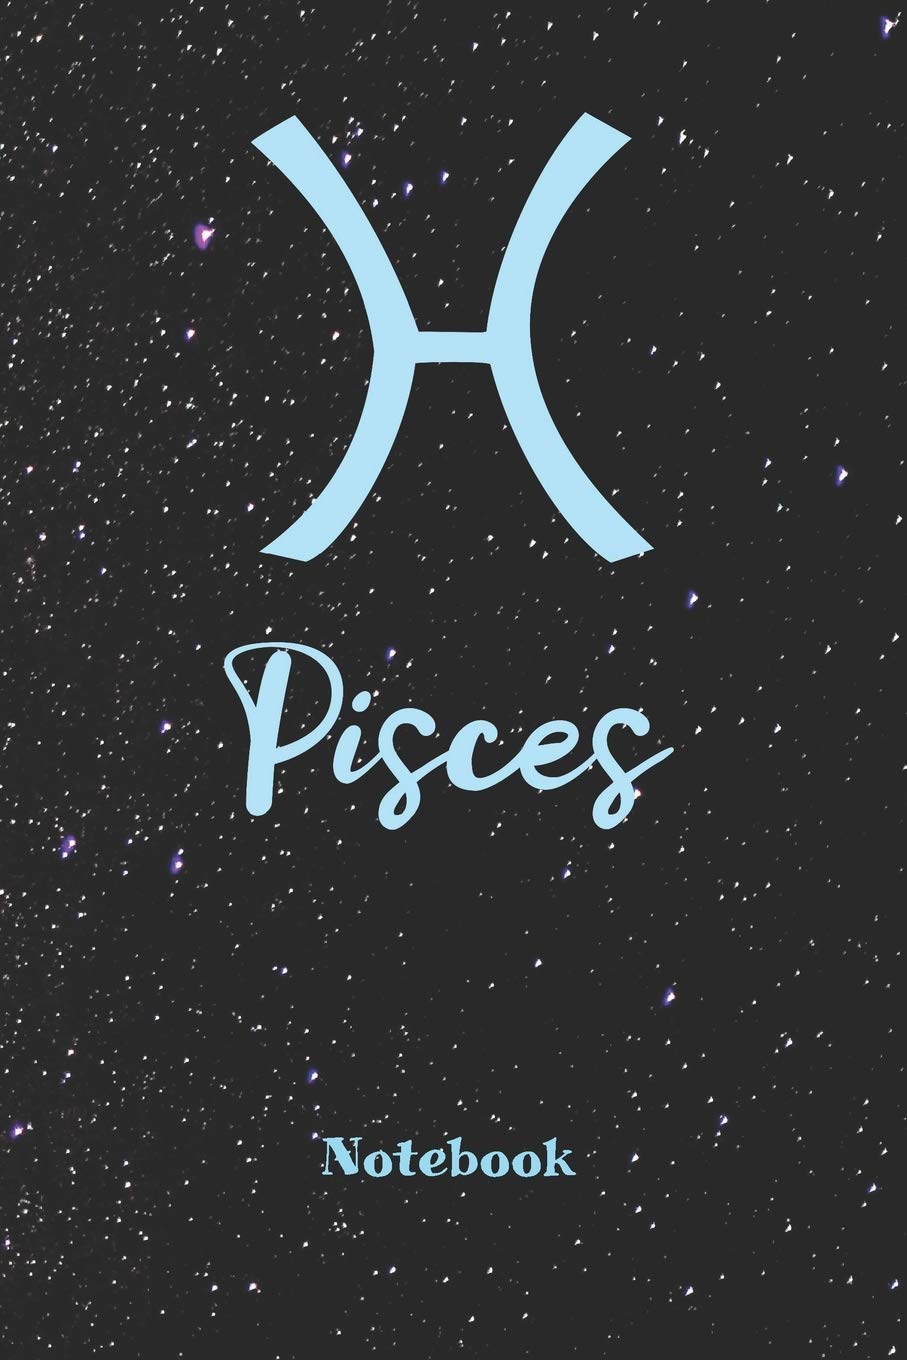 Amazon.in: Buy Pisces Zodiac Sign Notebook: Astrology Journal, Horoscope Notepad, Notes, 120 Pages, blanc lined, 6 x 9 diary Book Online at Low Prices in India. Pisces Zodiac Sign Notebook: Astrology